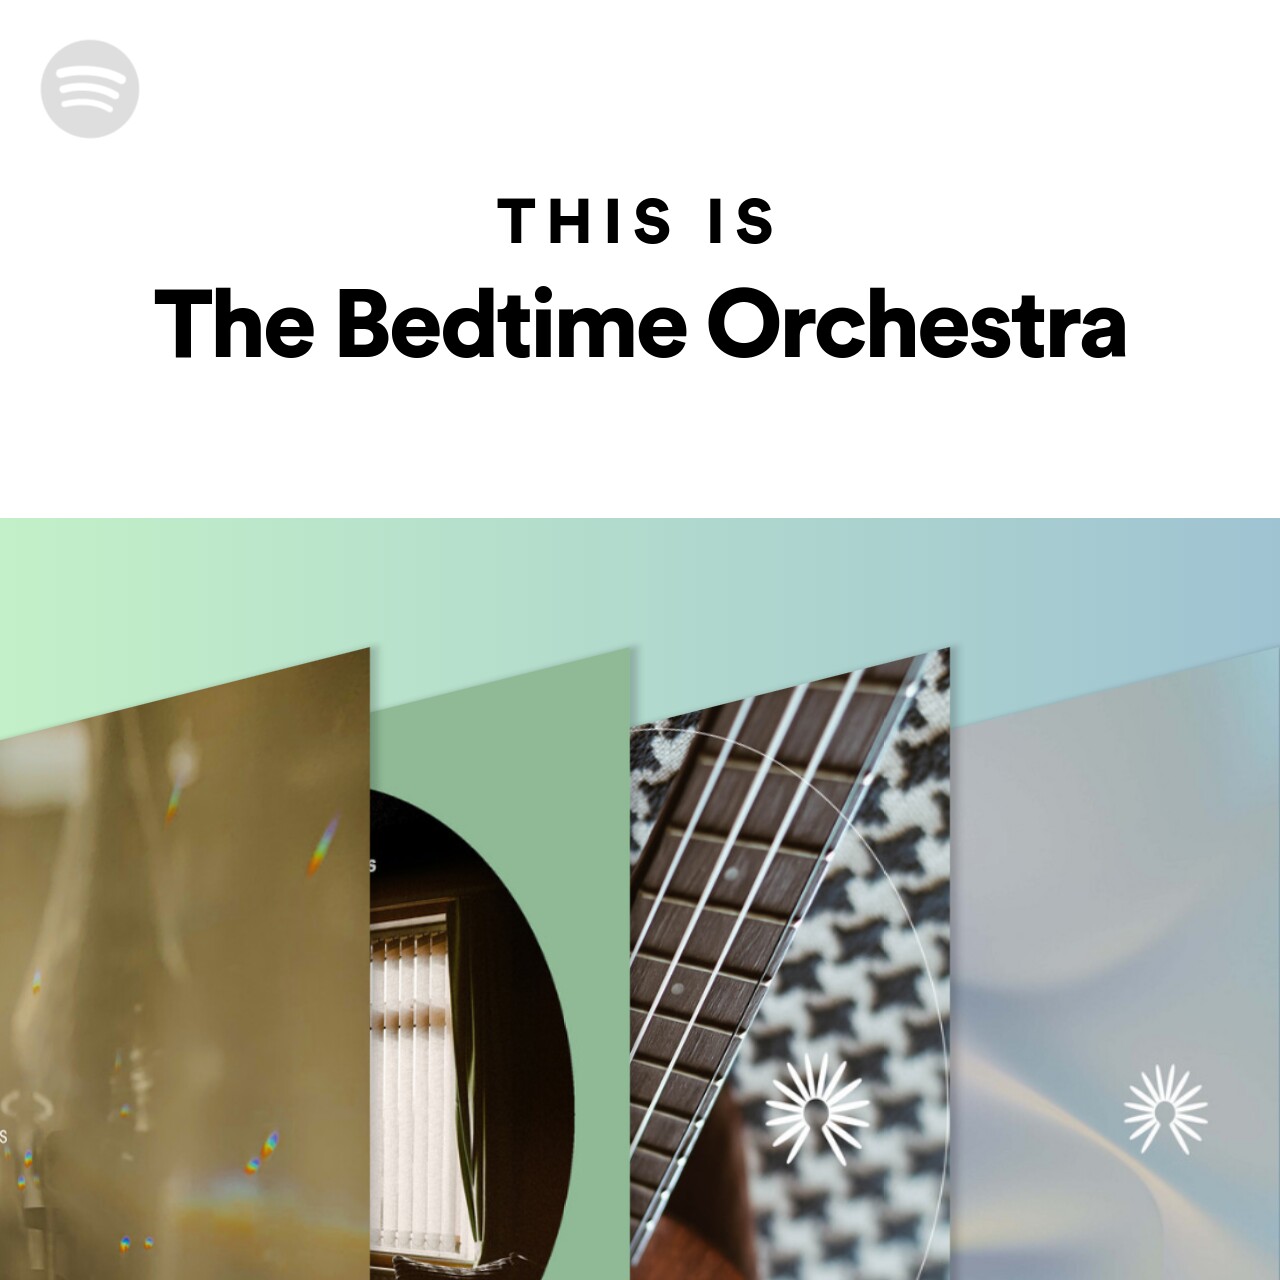 This Is The Bedtime Orchestra